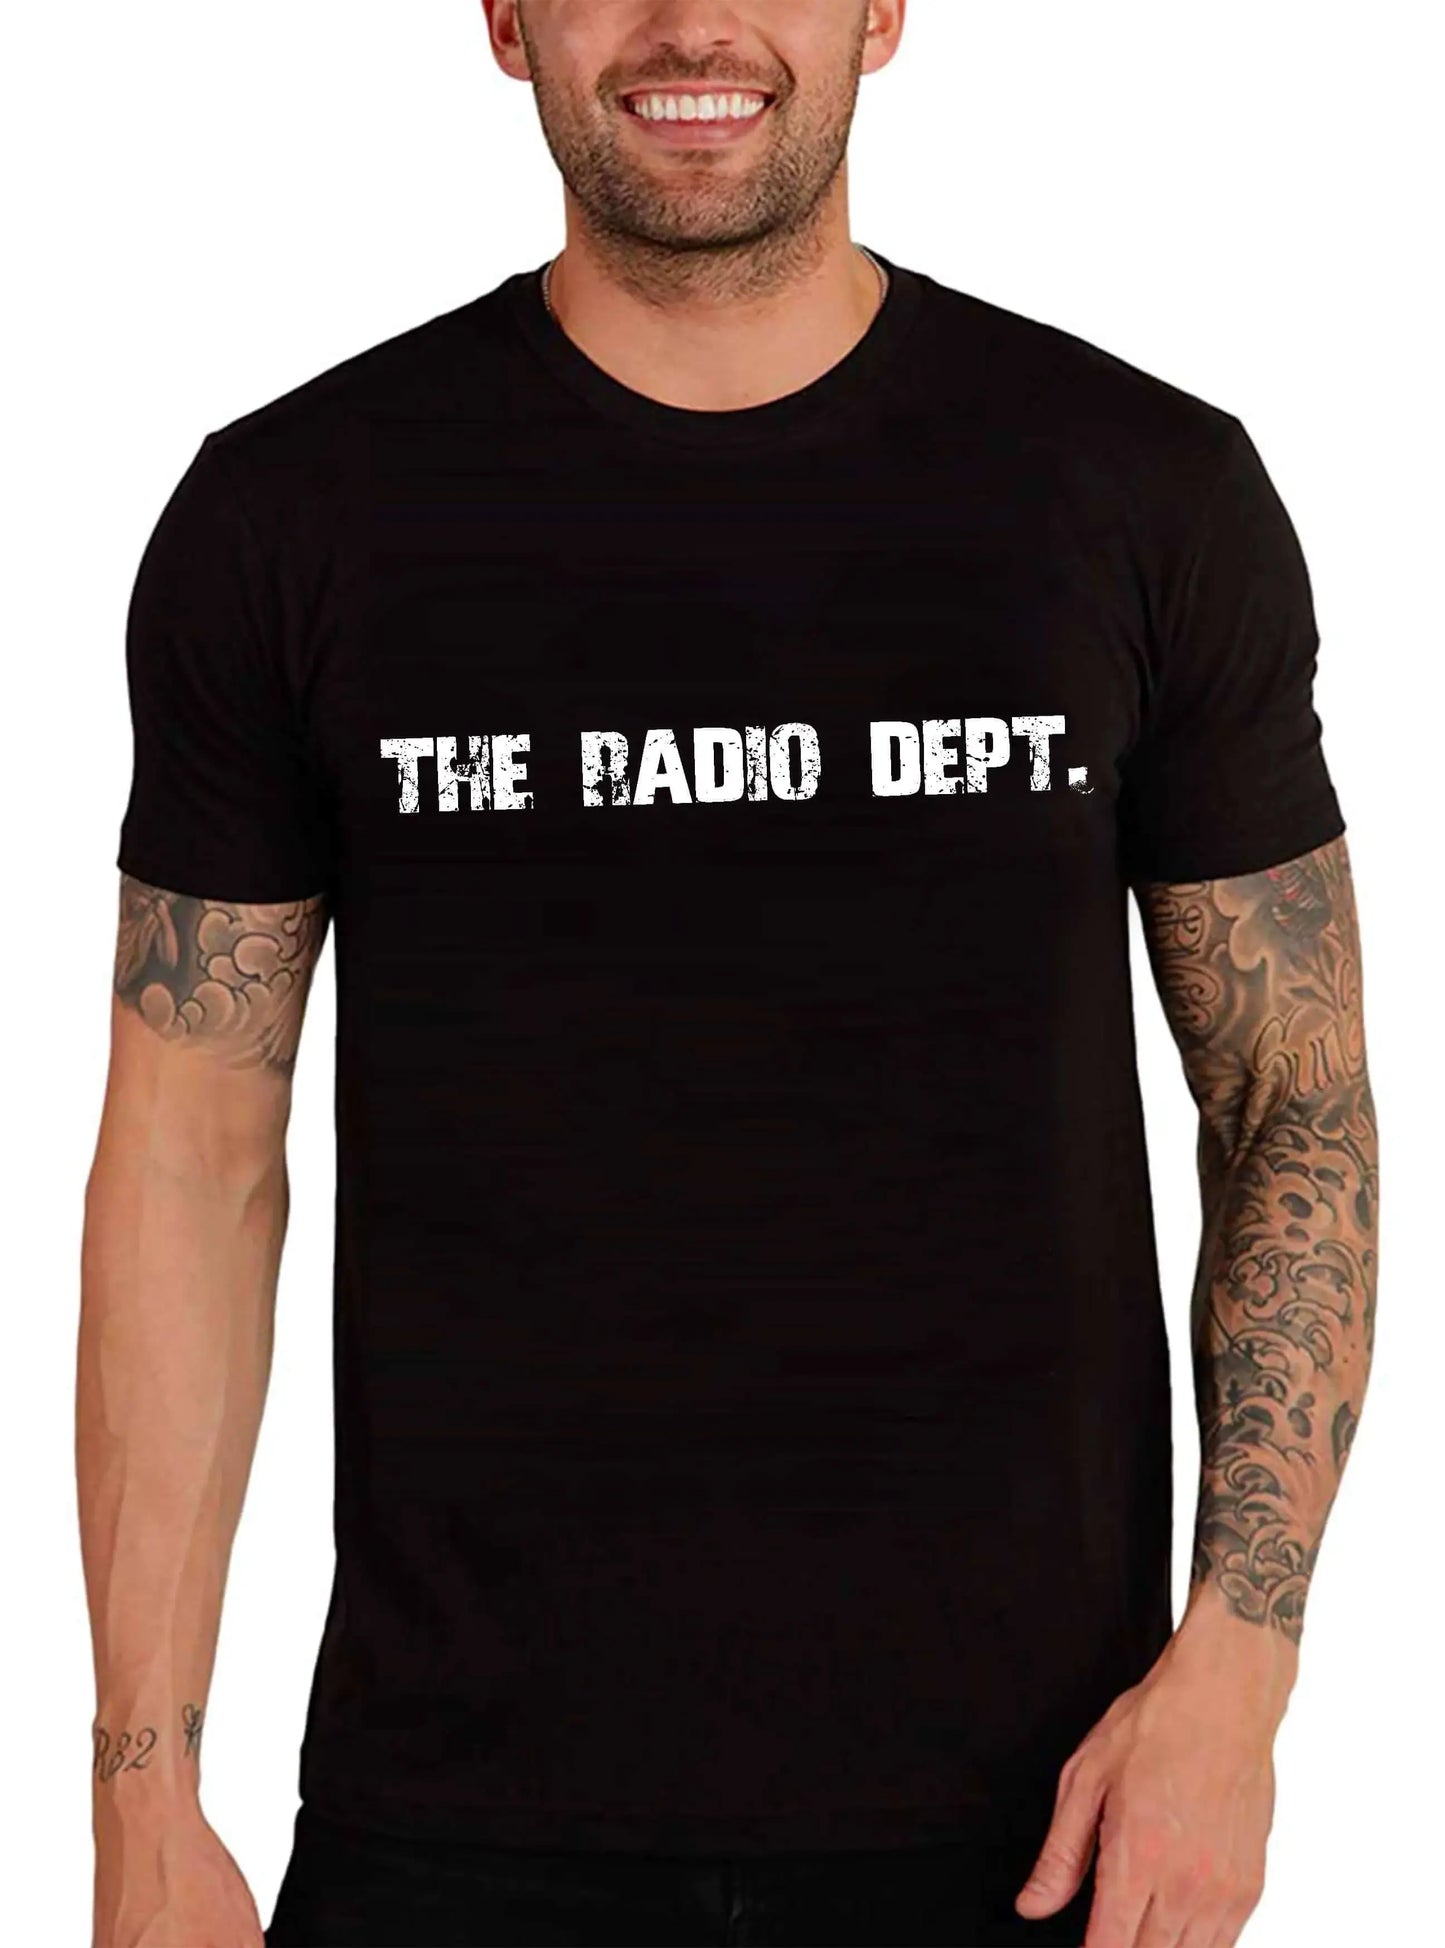 Men's Graphic T-Shirt The Radio Dept Eco-Friendly Limited Edition Short Sleeve Tee-Shirt Vintage Birthday Gift Novelty